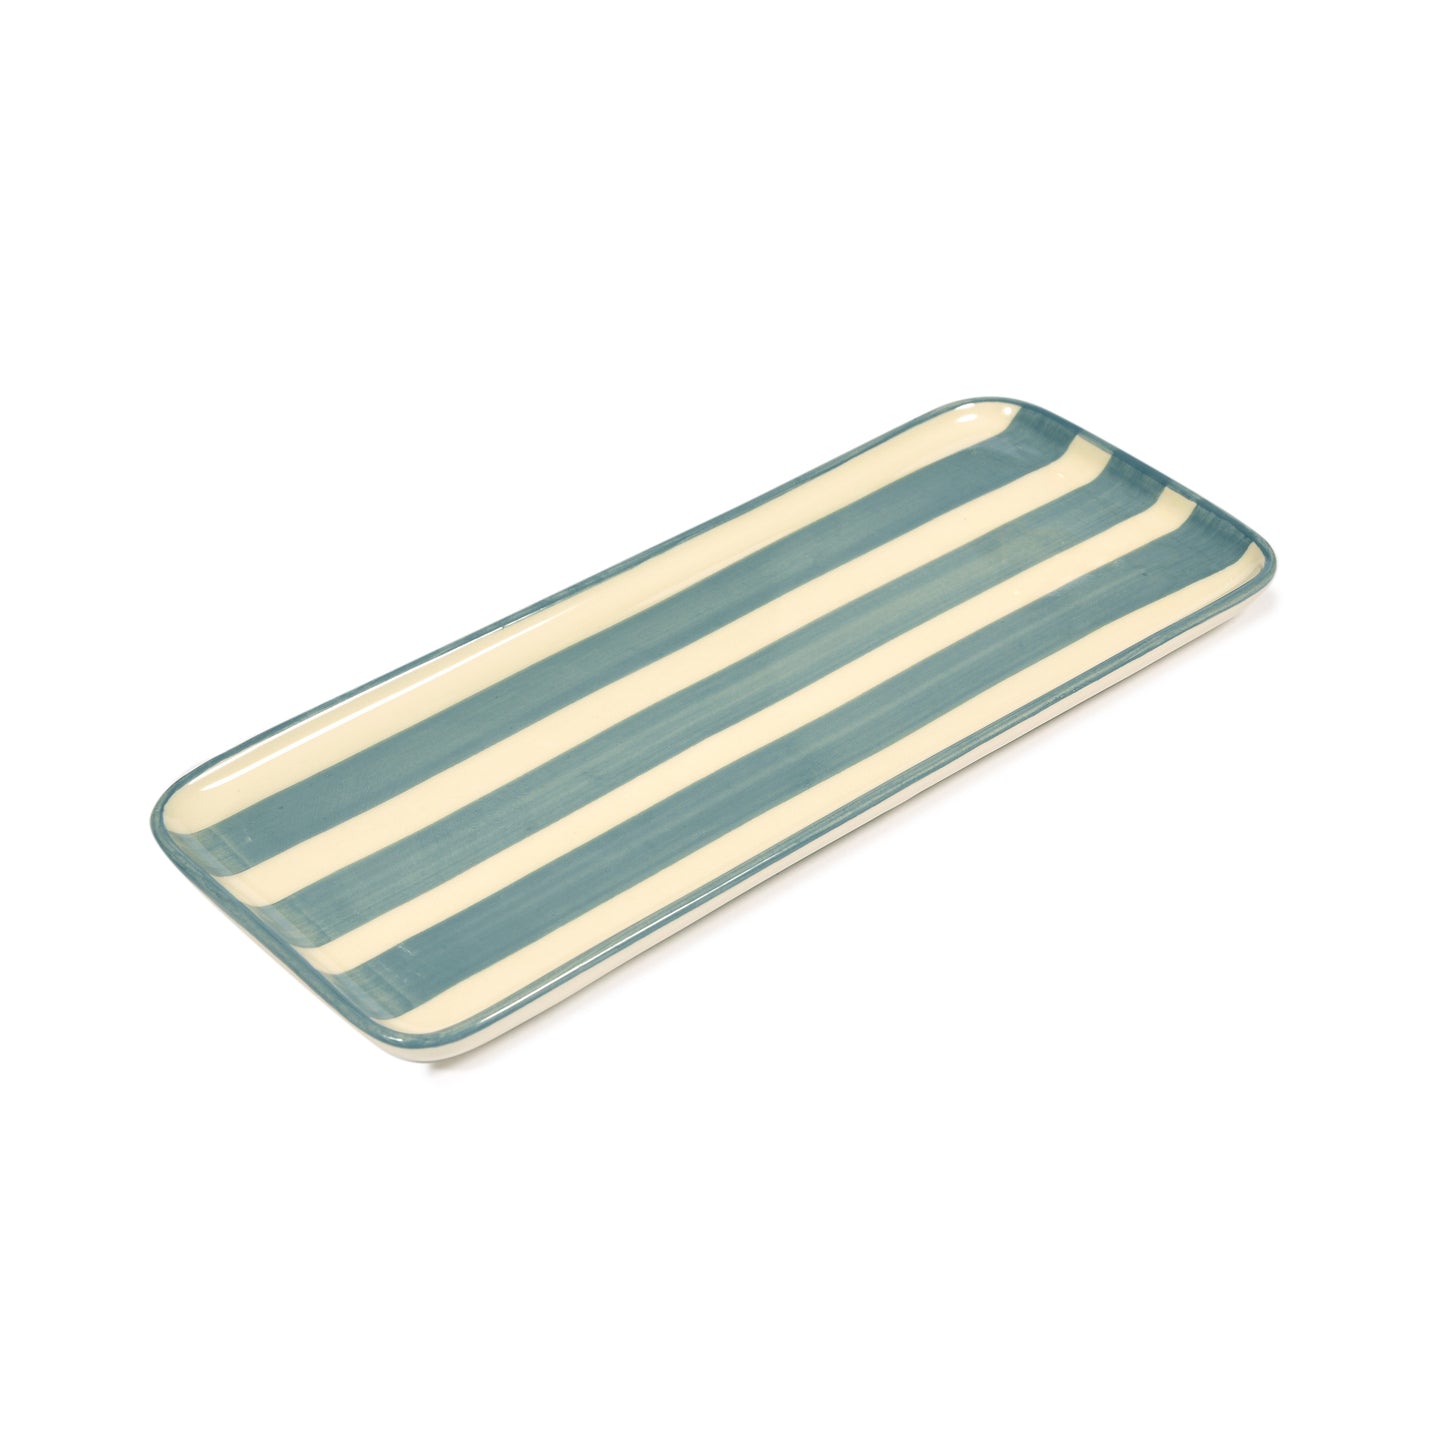 Grey Striped Porcelain Tray Not specified